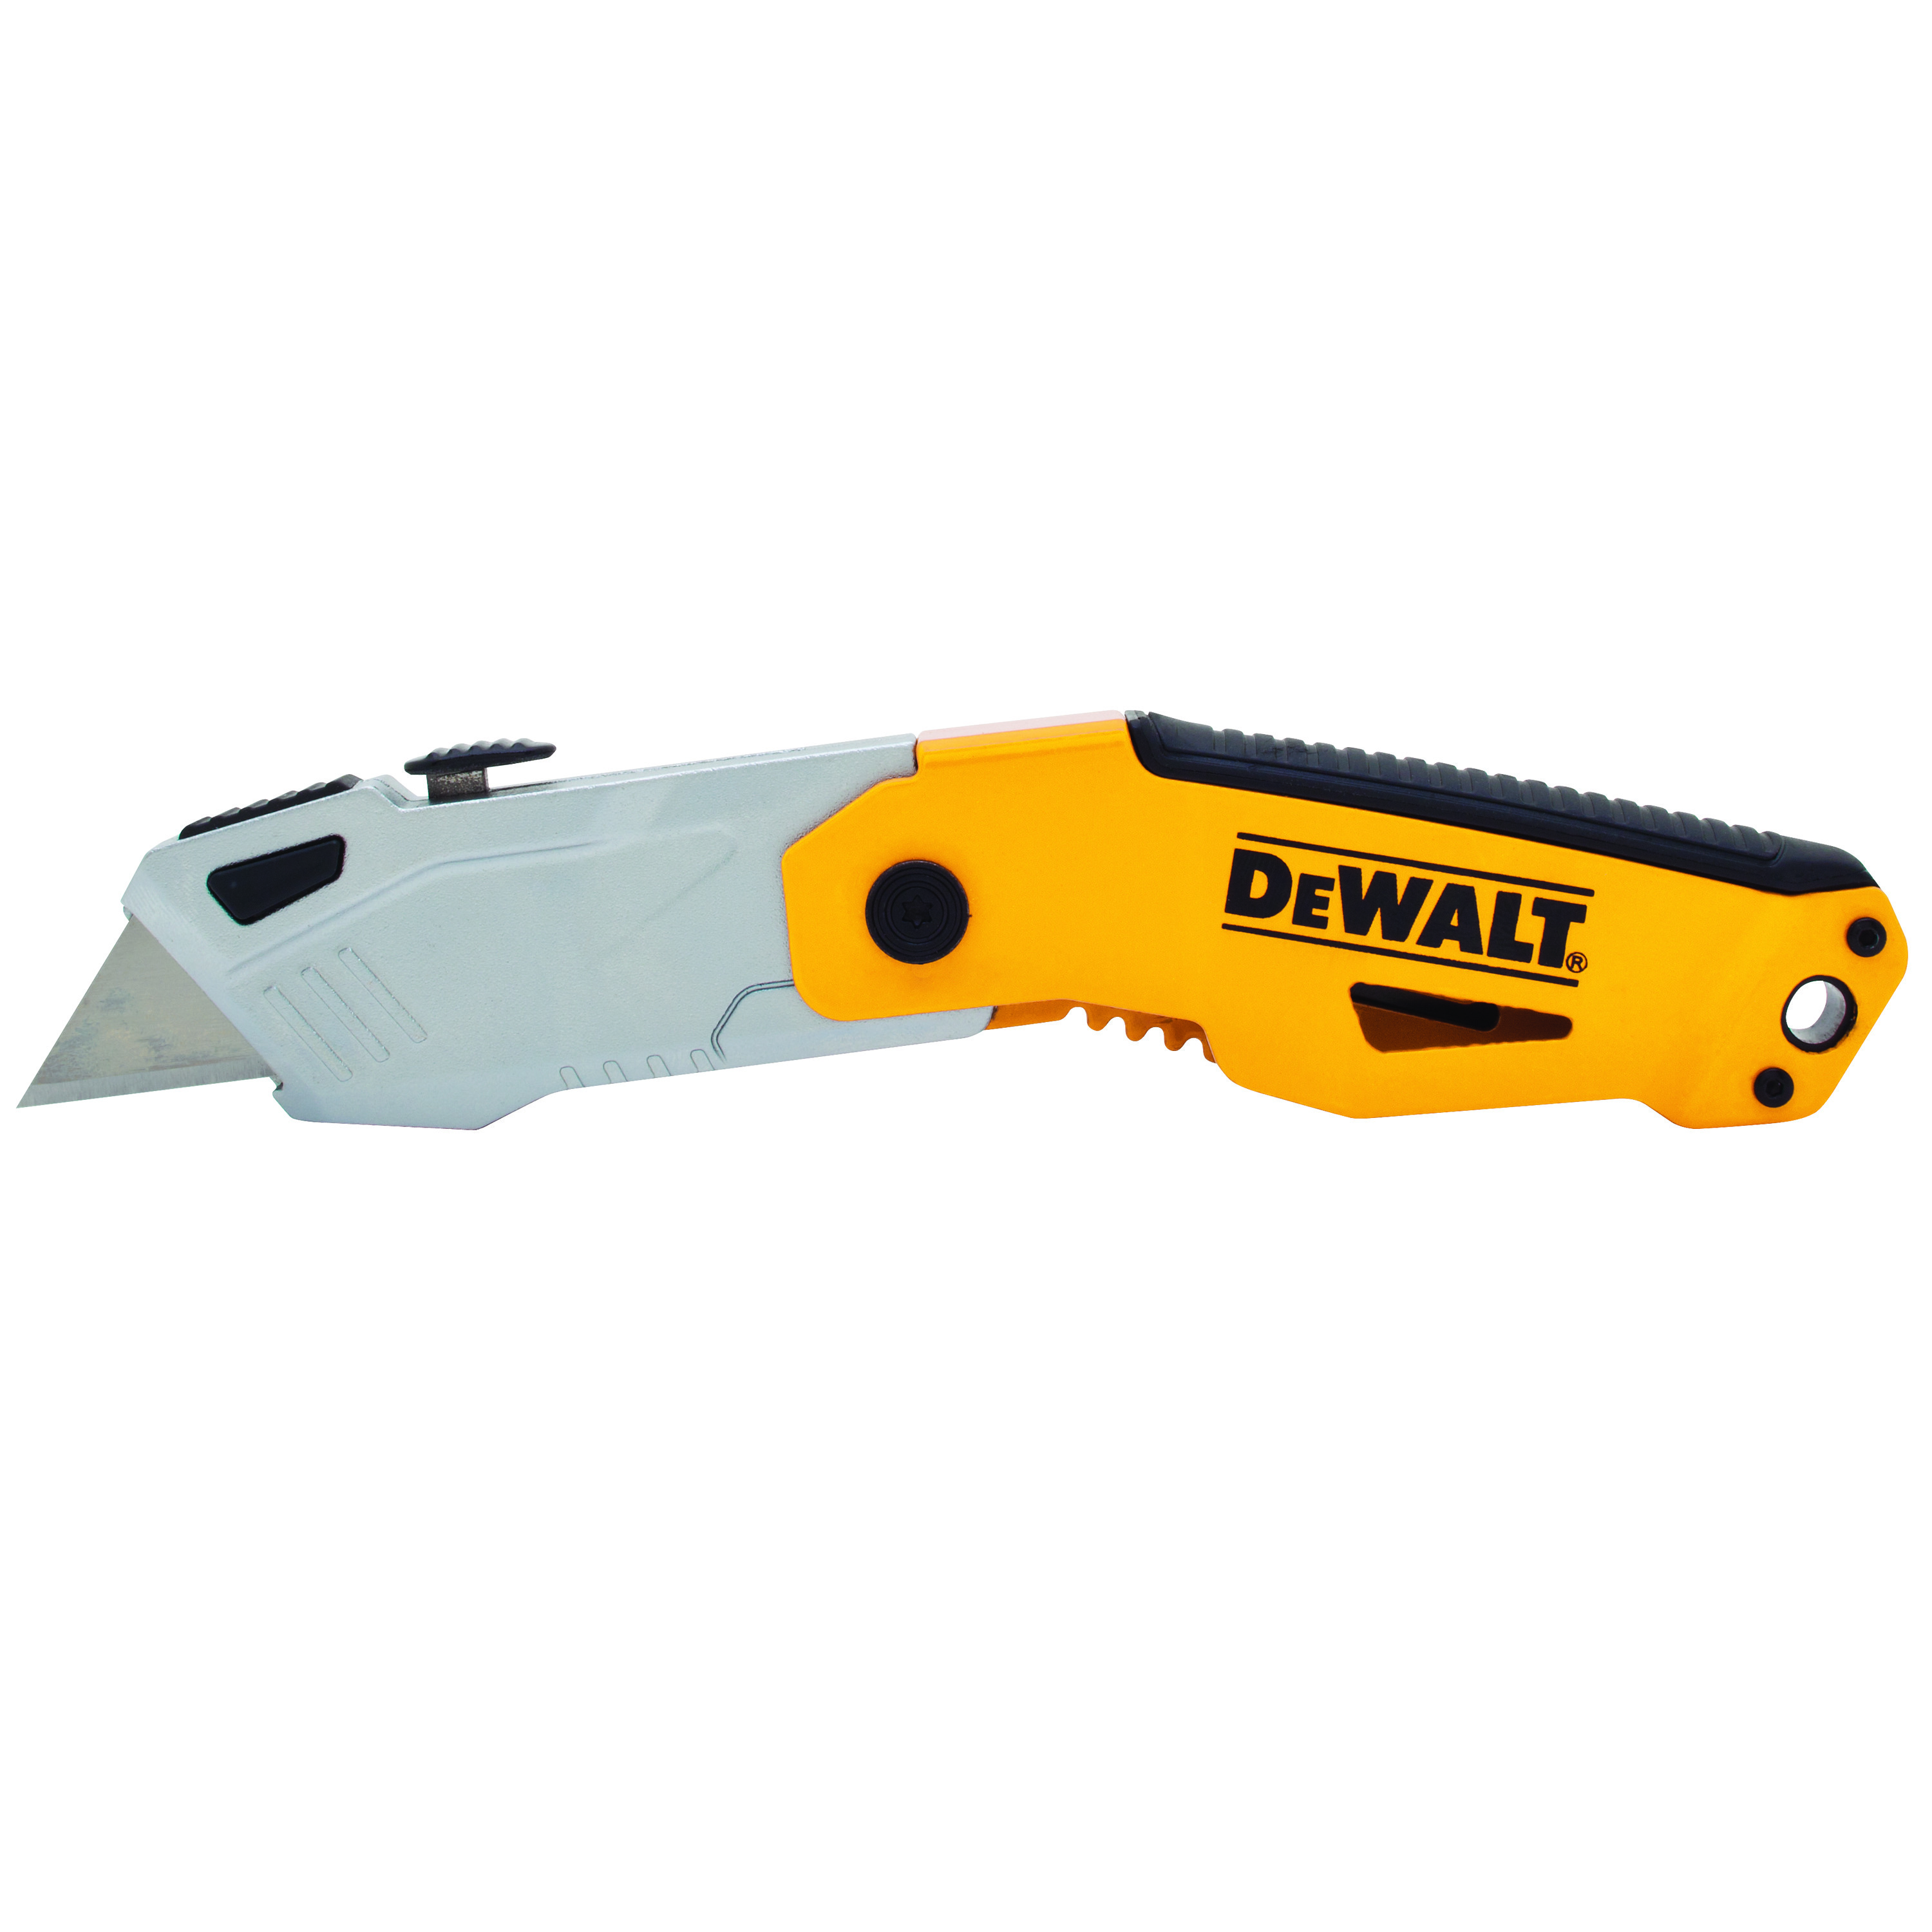 DeWALT® DWHT10261 Auto-Lock Folding Utility Knife, Retractable Blade, Push Button, Steel Blade, 3 Blades Included, 7-1/4 in OAL